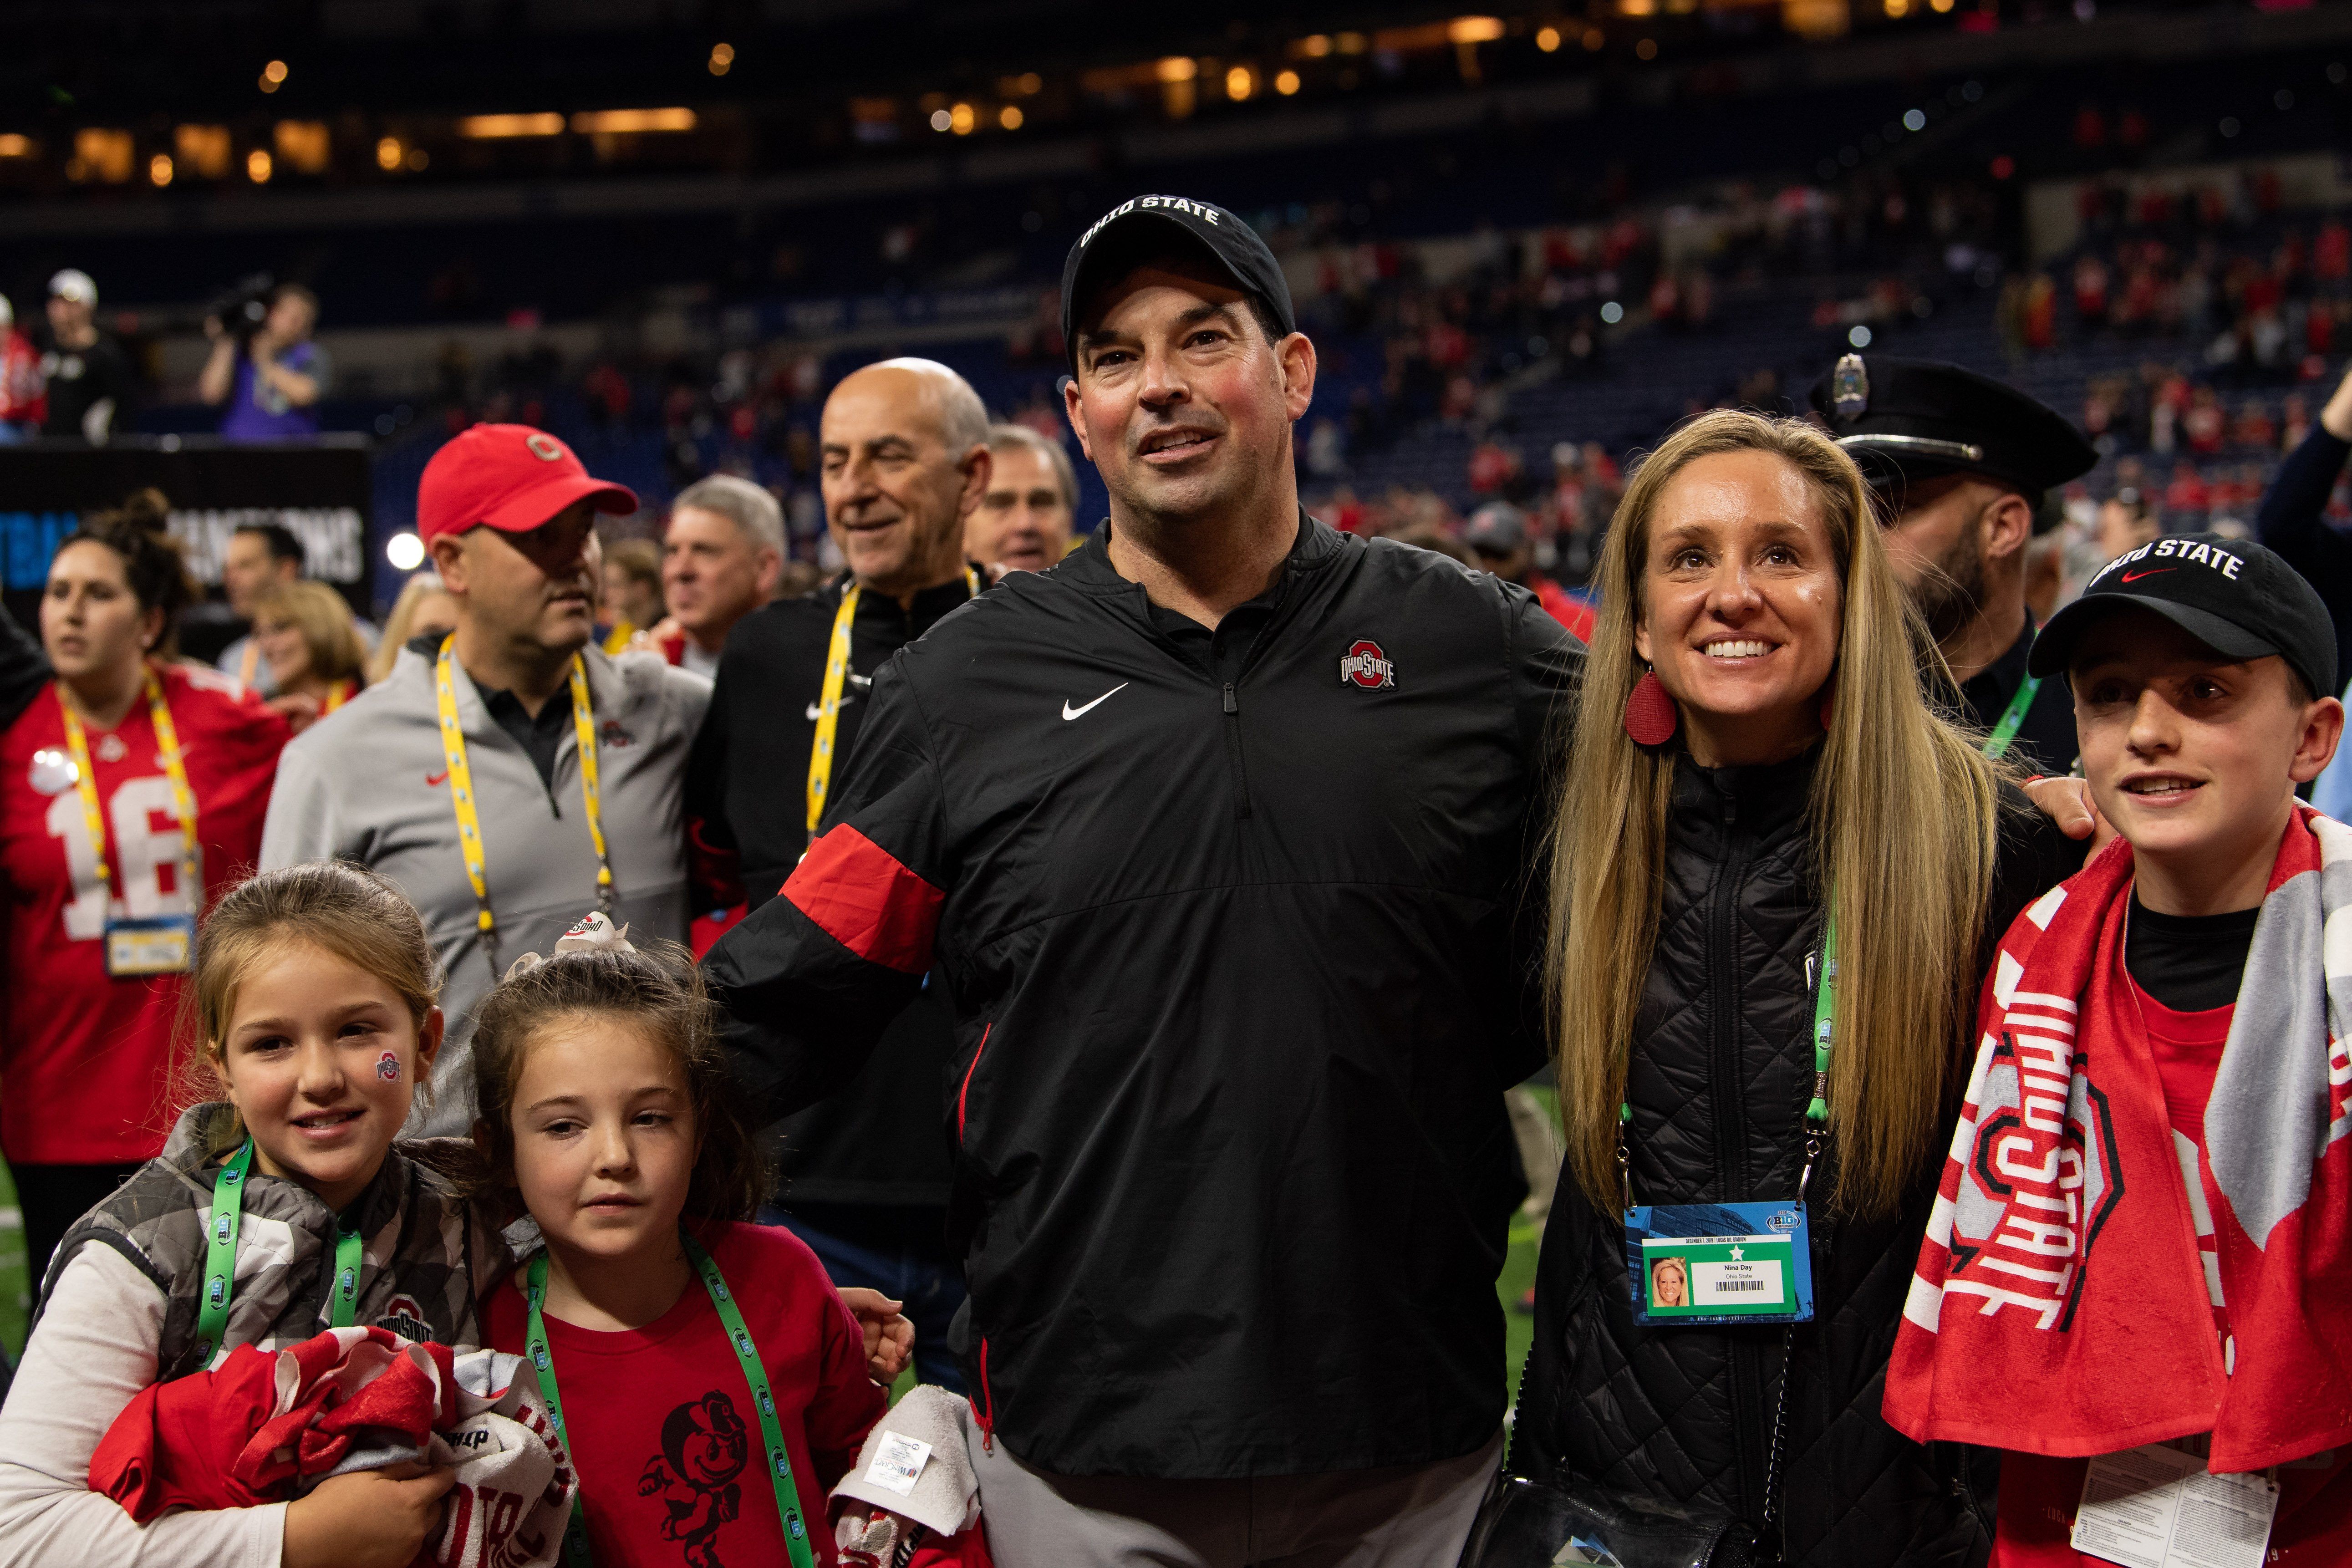 Ryan Day and his wife Christina at the Big 10 Championship game between the Wisconsin Badgers and Ohio State Buckeyes in 2019, in Indianapolis. | Source: Getty Images